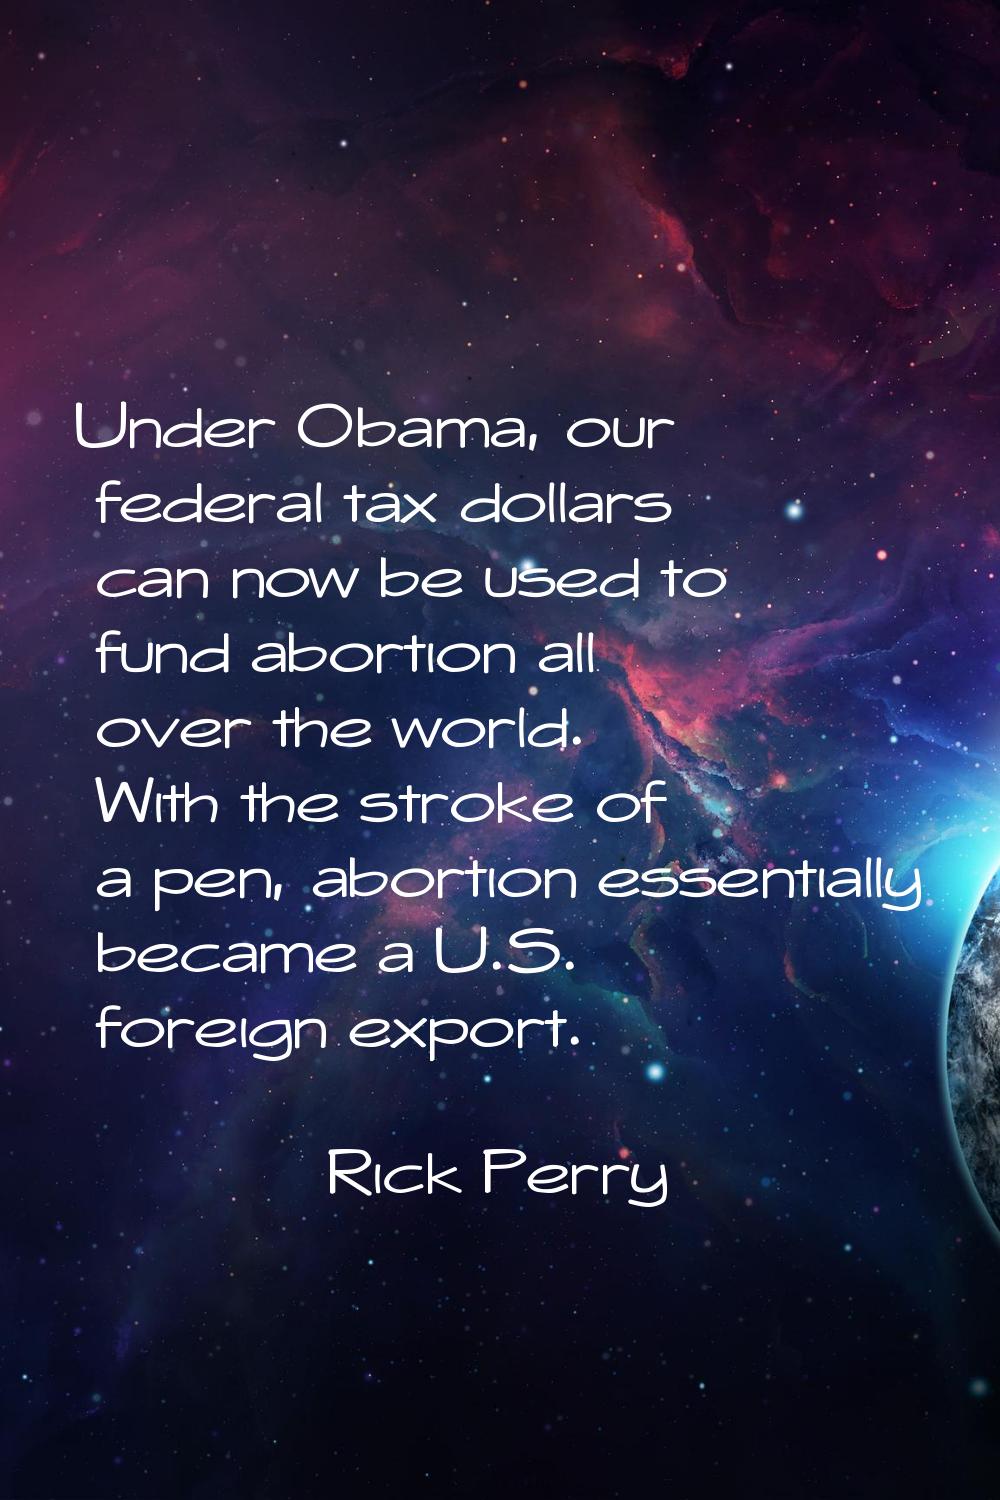 Under Obama, our federal tax dollars can now be used to fund abortion all over the world. With the 